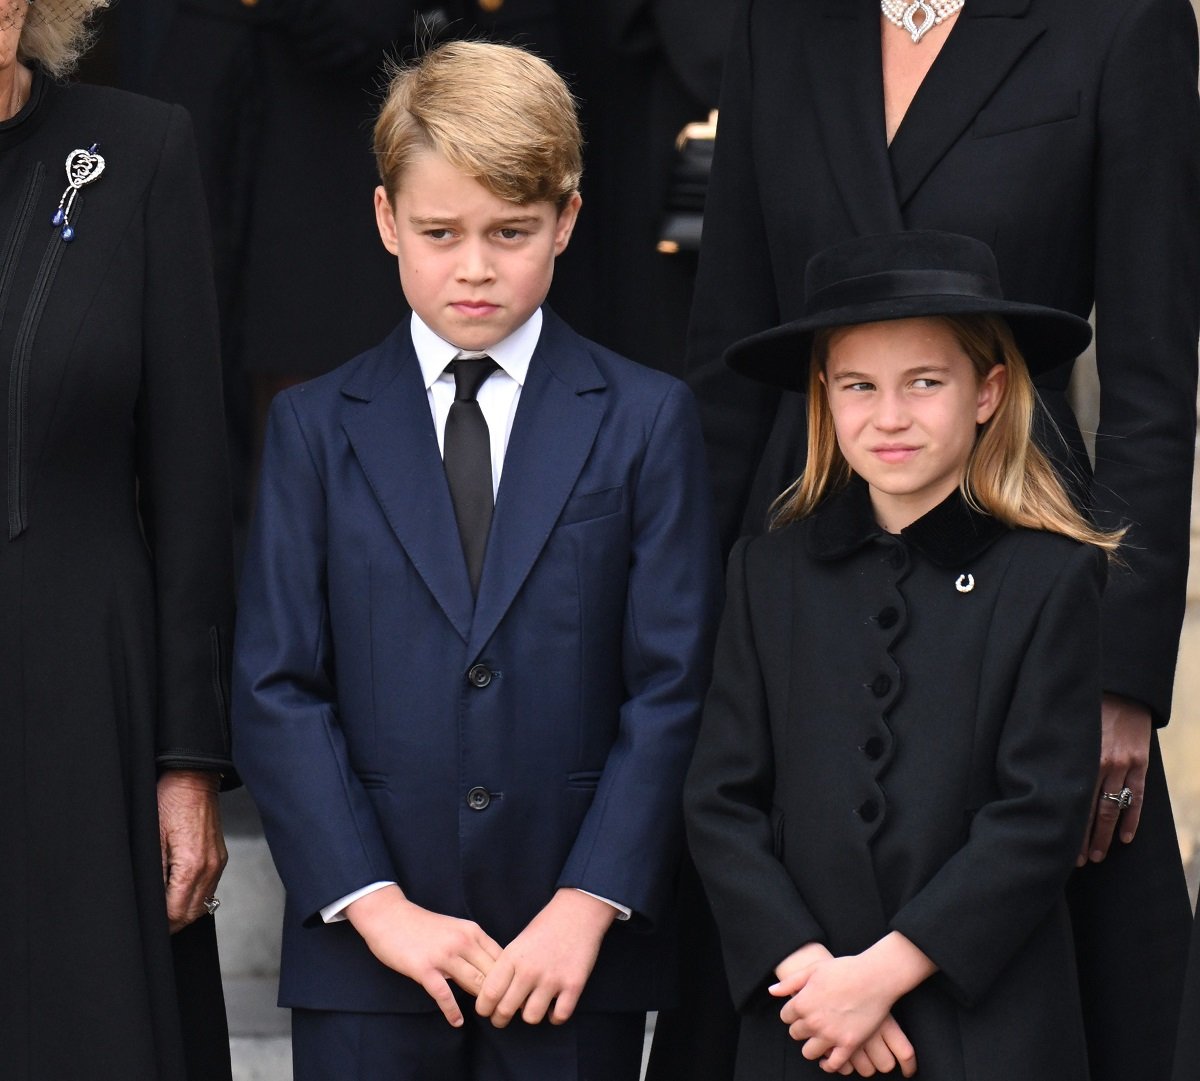 Prince George and Princess Charlotte at the state funeral of their great-grandmother Queen Elizabeth II